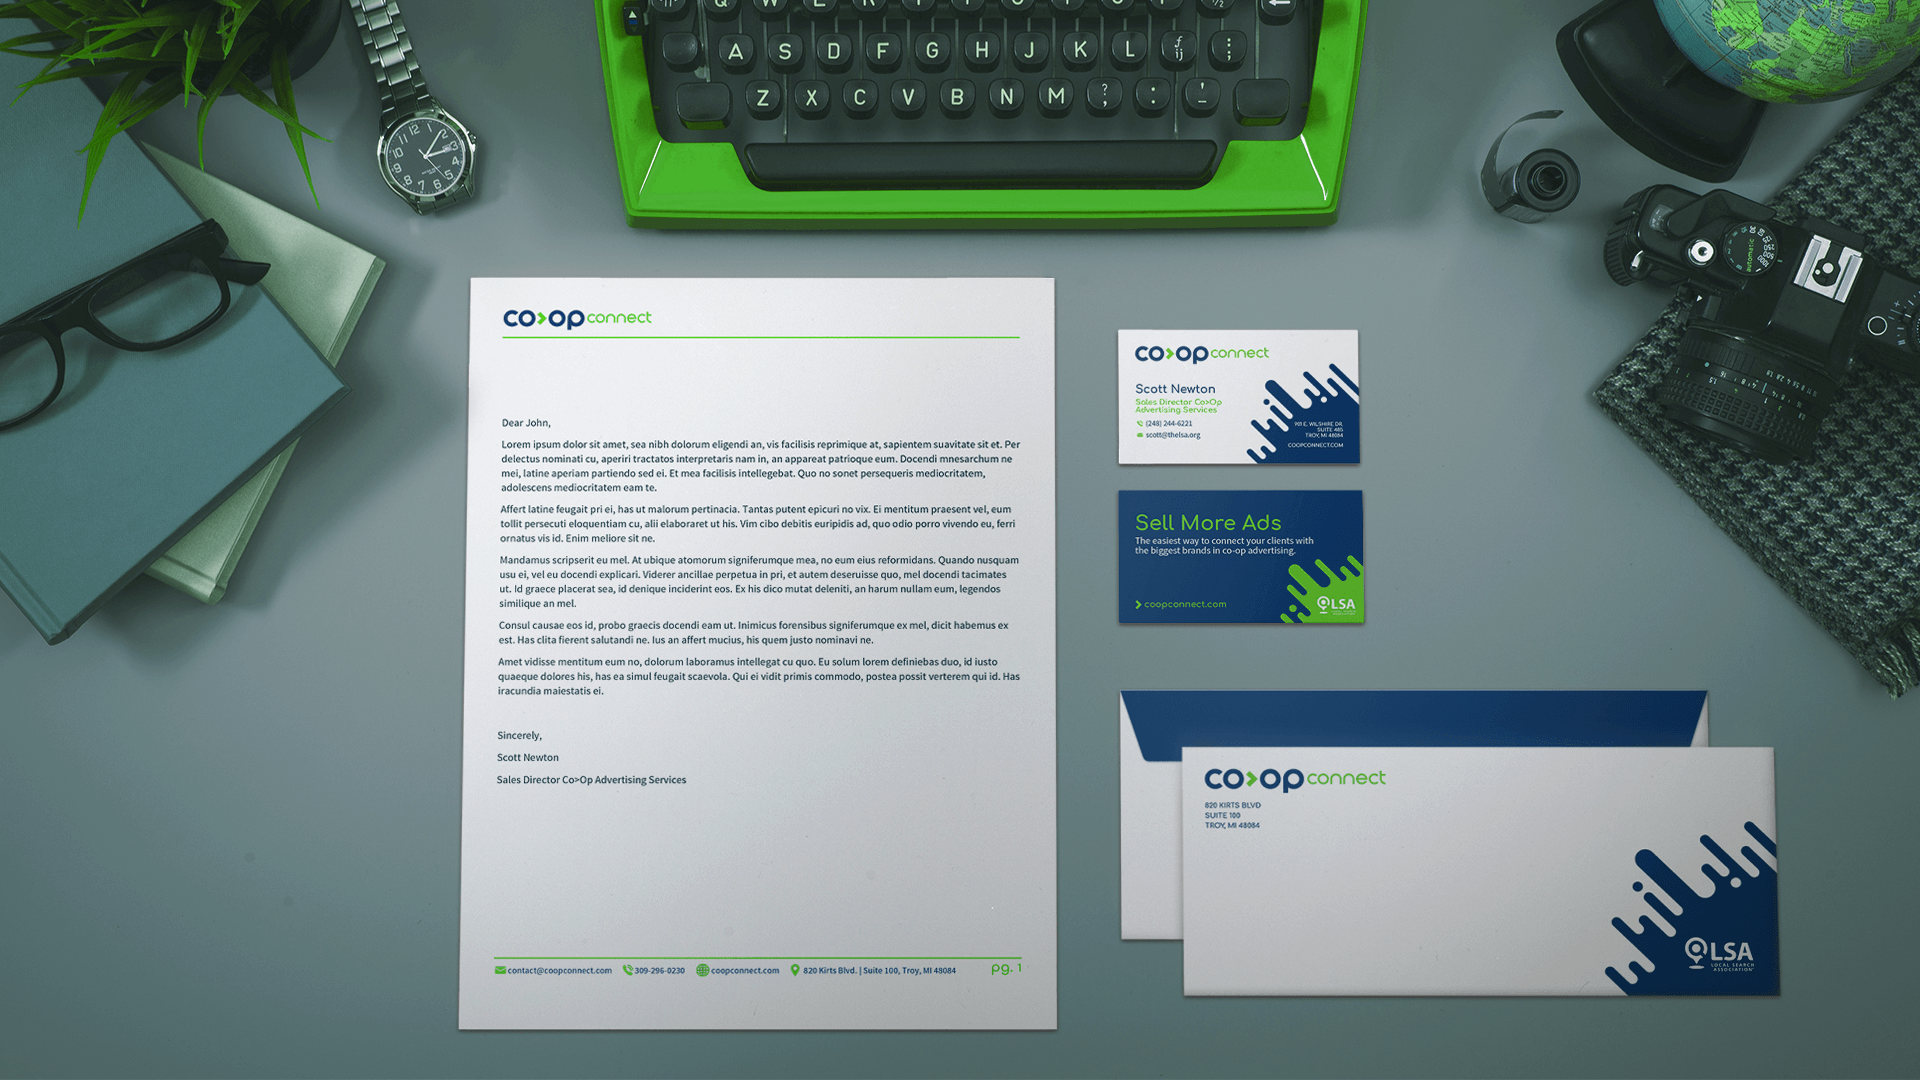 Fulkrum created new company stationary, envelopes and business cards